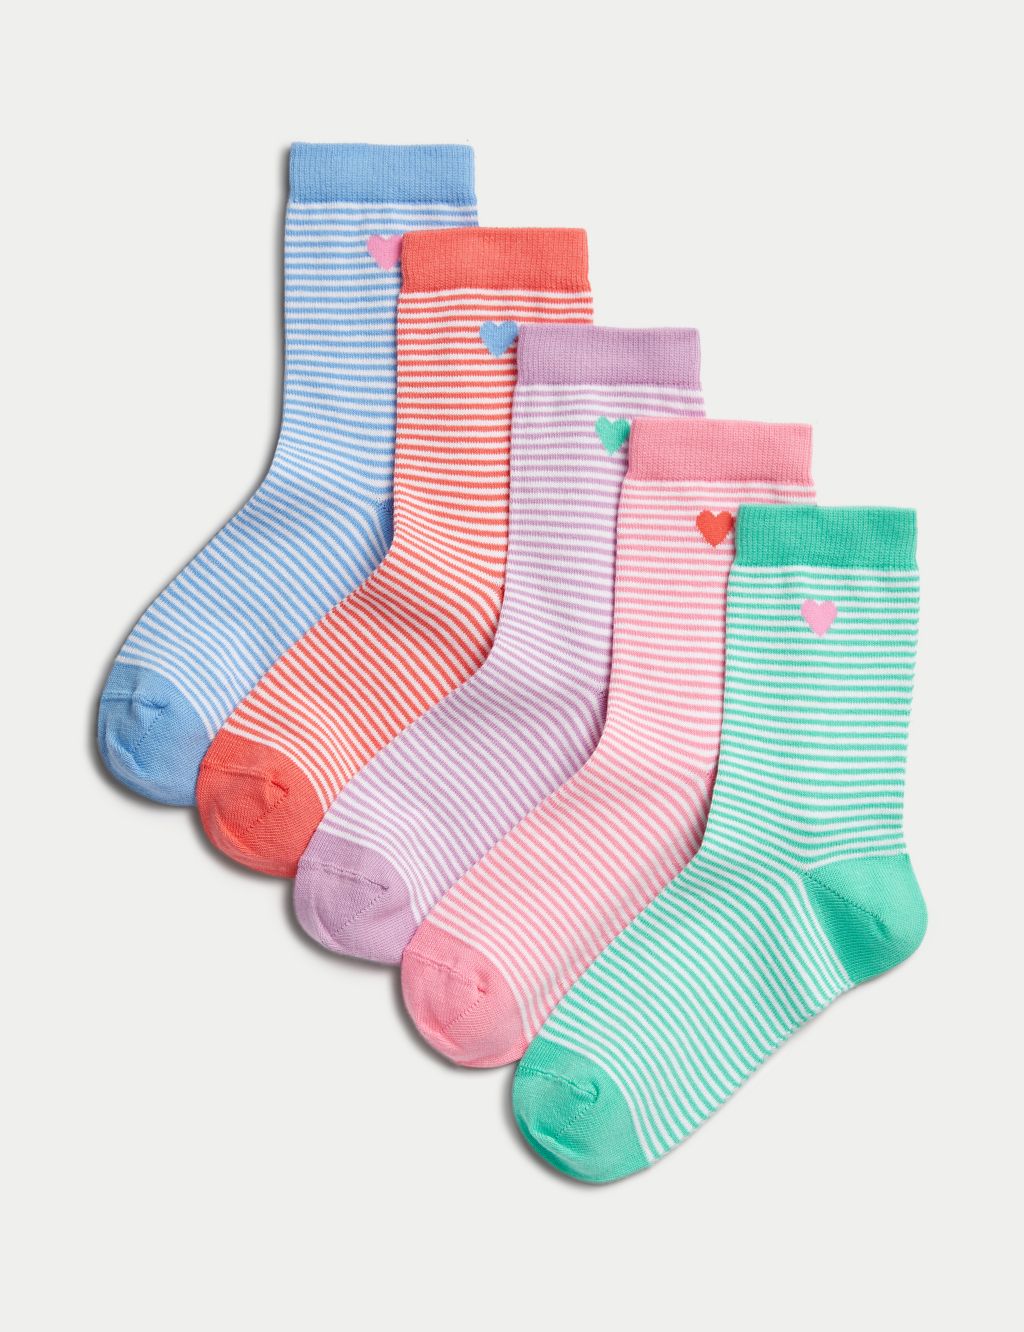 Boys Girls Striped Socks Rainbow Colour Cotton Rich 5-pack Ankle Kid Age 1  to 5